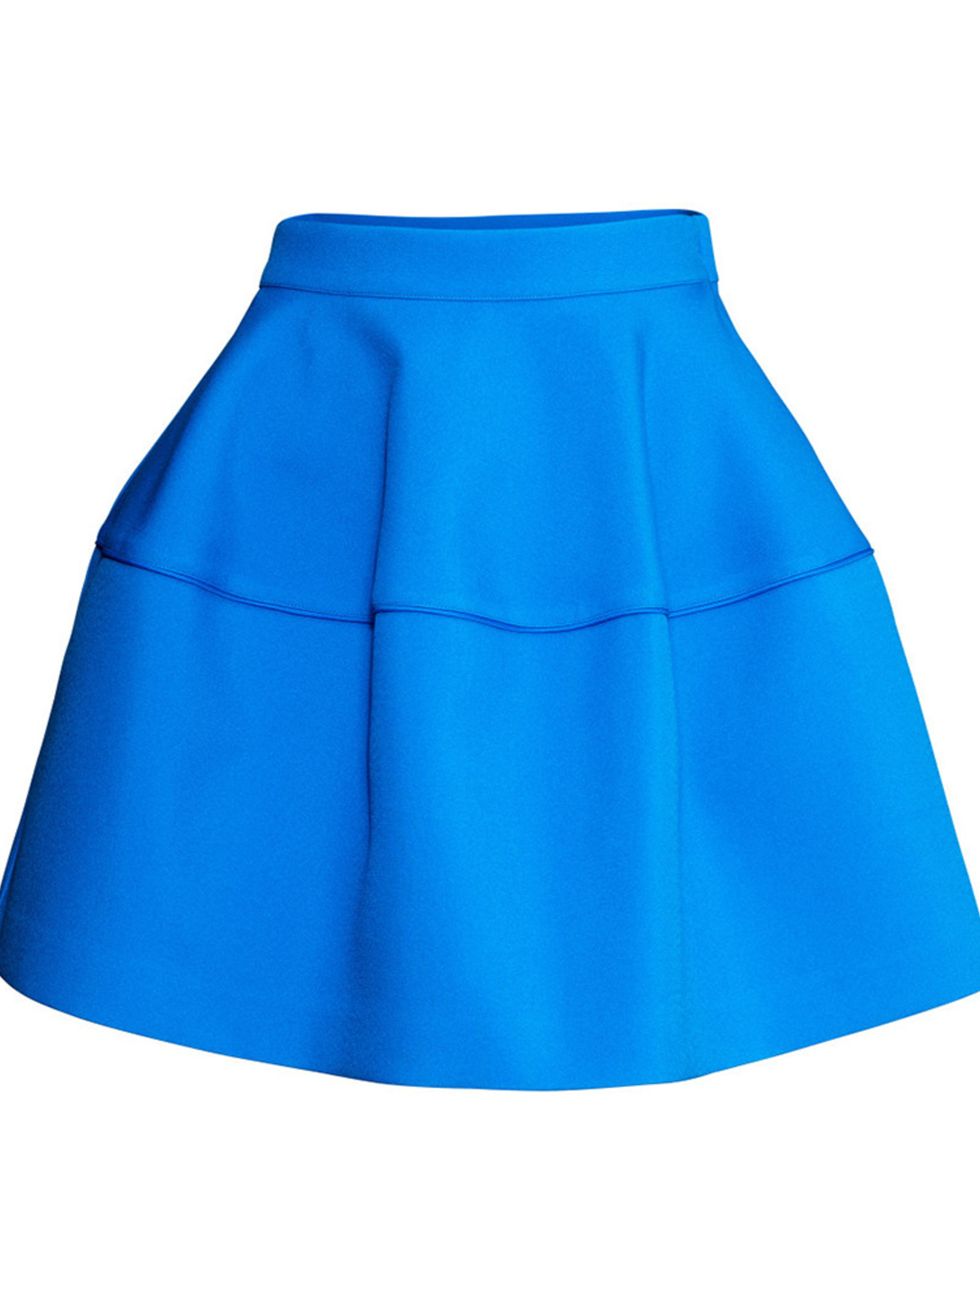 <p><a href="http://www.hm.com/gb/product/59630?article=59630-B" target="_blank">H&M</a> flared skirt, £29.99</p>